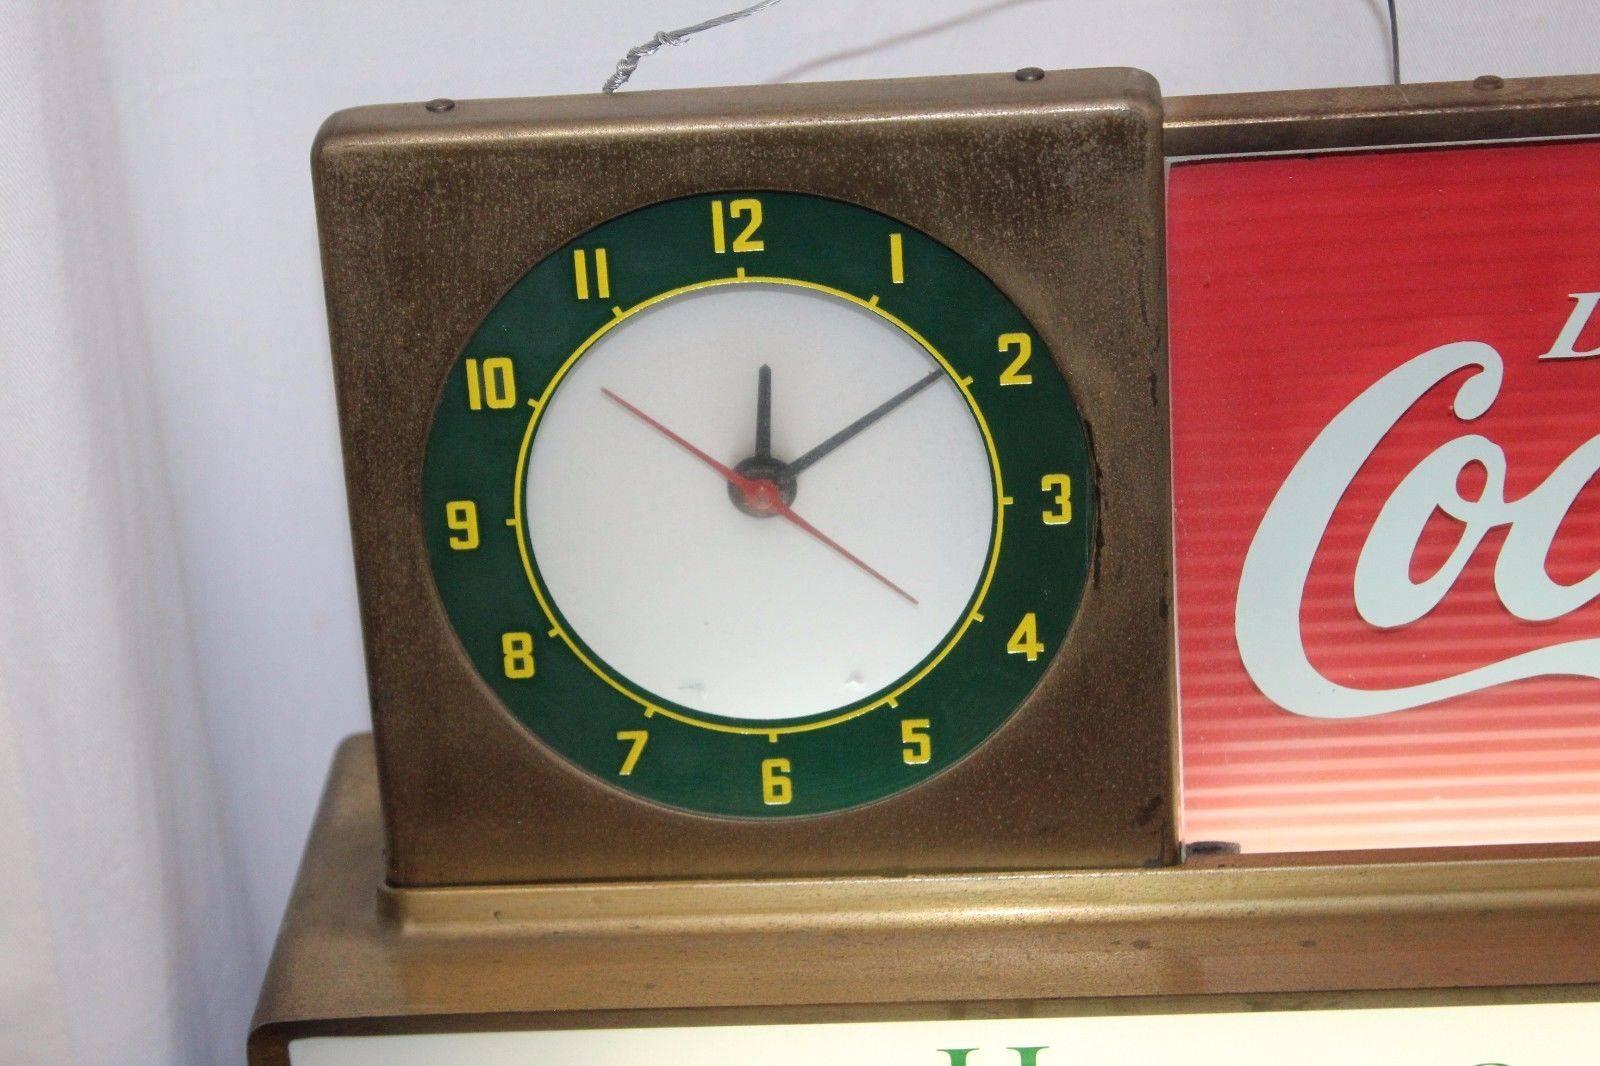 This awesome advertising is perfect clock for any counter or desk. Coca Cola made different variations and this is only one of the many styles. Awesome light up sign that can be turned off while plugged in so you can continue keeping time.